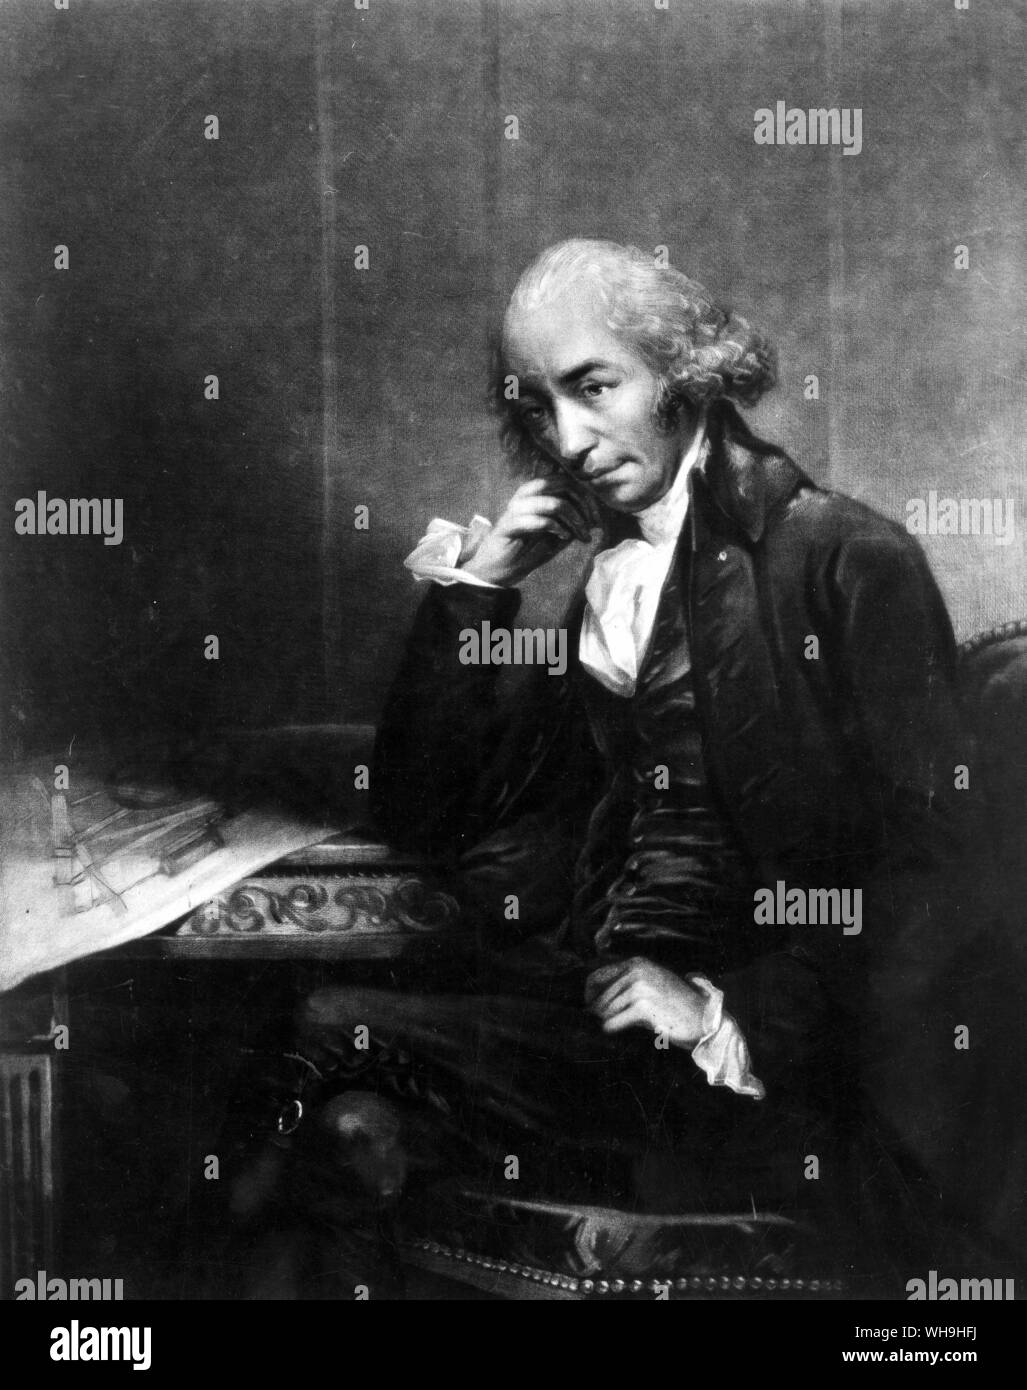 James Watt ( (1736-1819), Scottish engineer who developed the steam engine in the 1760s. Aged 57 yrs old by S. W. Reynolds. Stock Photo